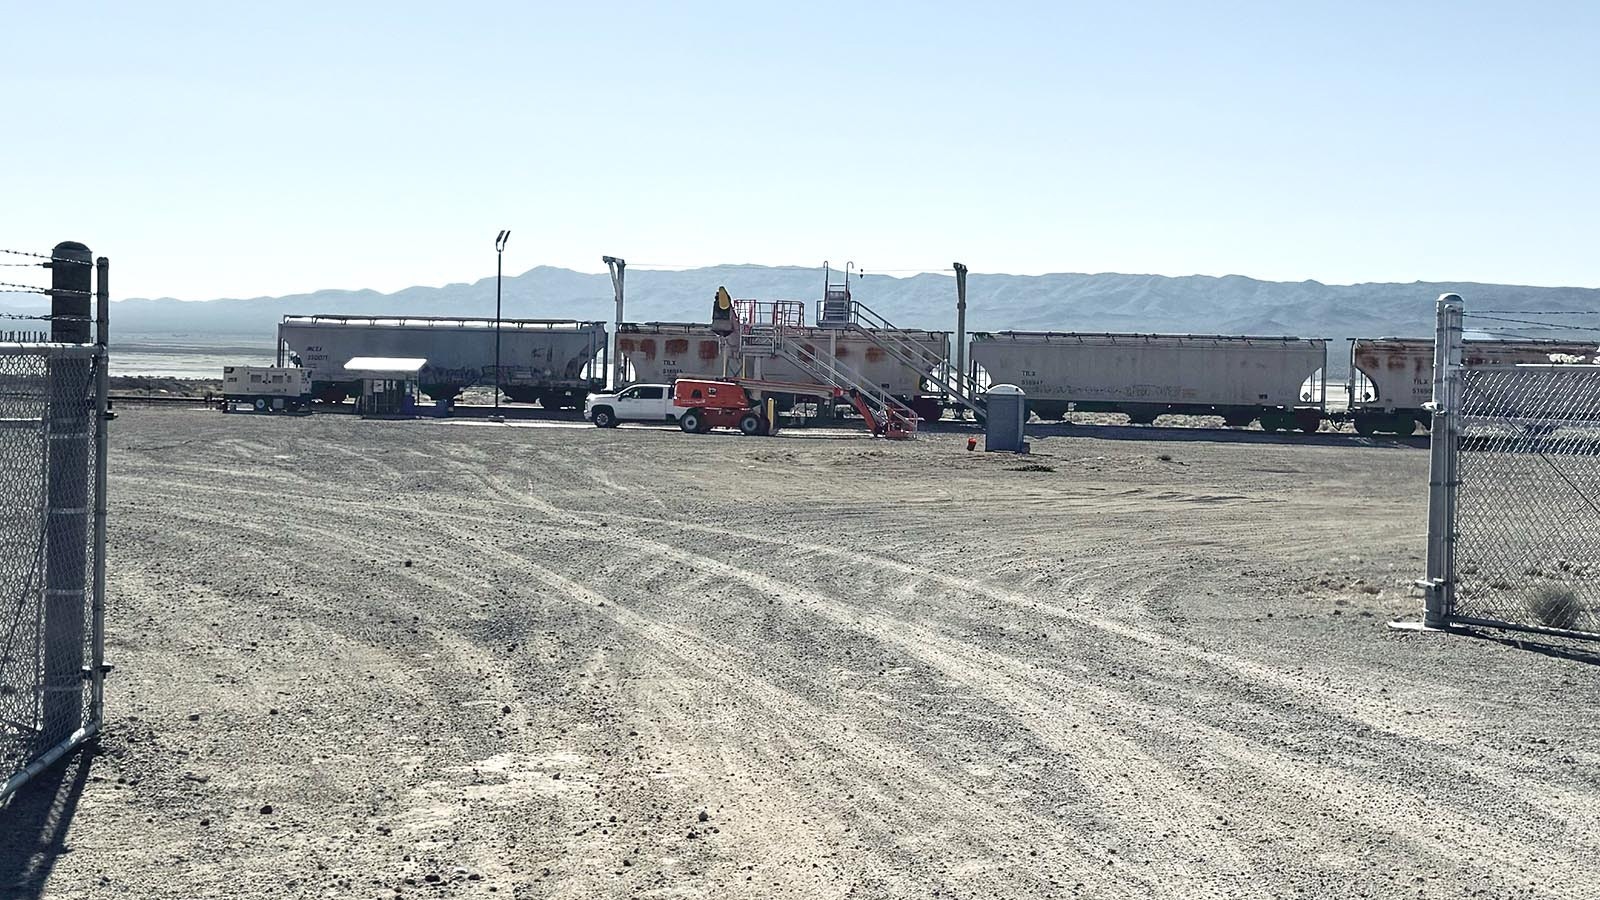 The entrance to the Dyno Nobel rail yard  in Saltdale, California, where it keeps its workers watch over the explosive chemical ammonium nitrate for use in local gold and borax mining operations.